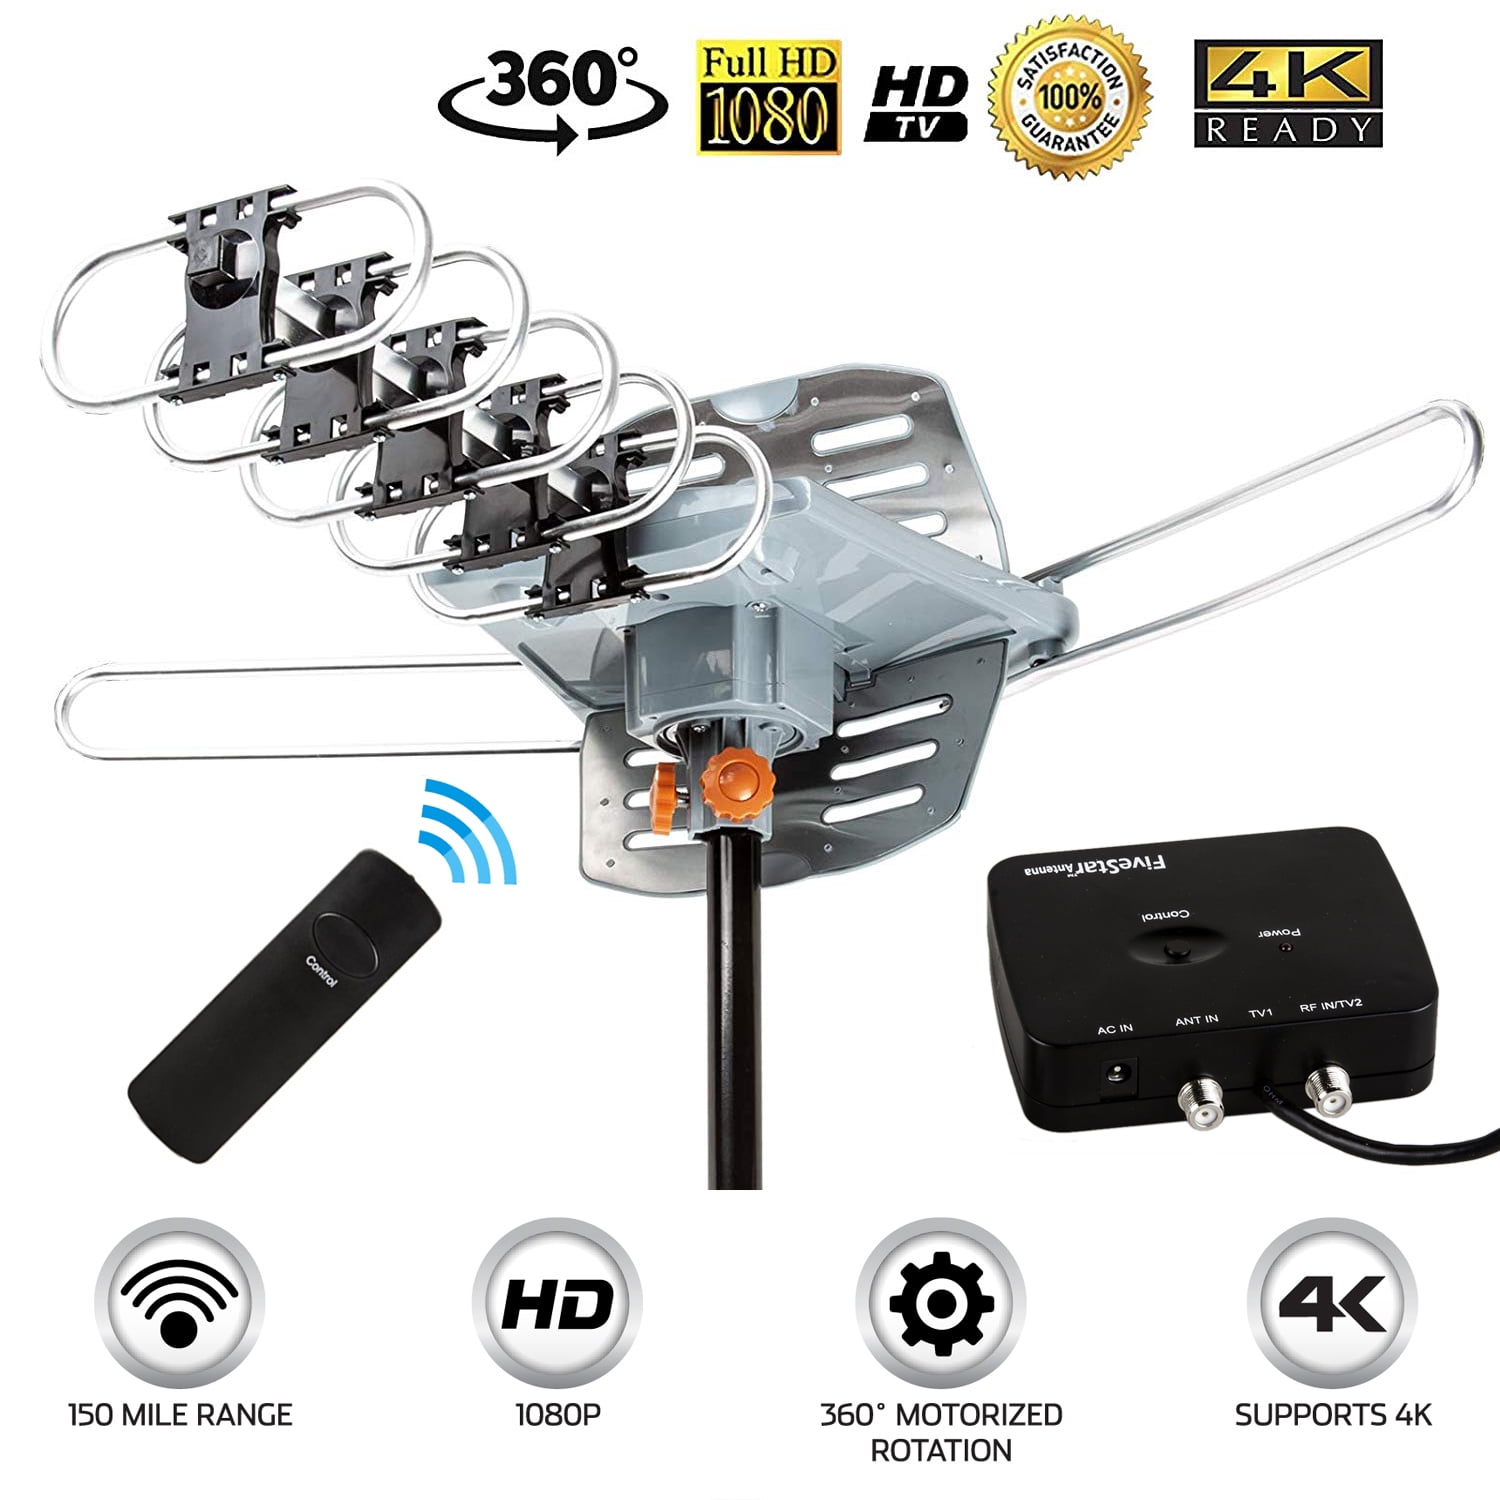 UHF/VHF/FM Radio Infrared Remote Control with Mounting Pole & 40FT RG6 Coax Cable Support 2 TVs Five Star Outdoor HD TV Antenna Strongest Up to 150 Miles Long Range with Motorized 360 Degree Rotation